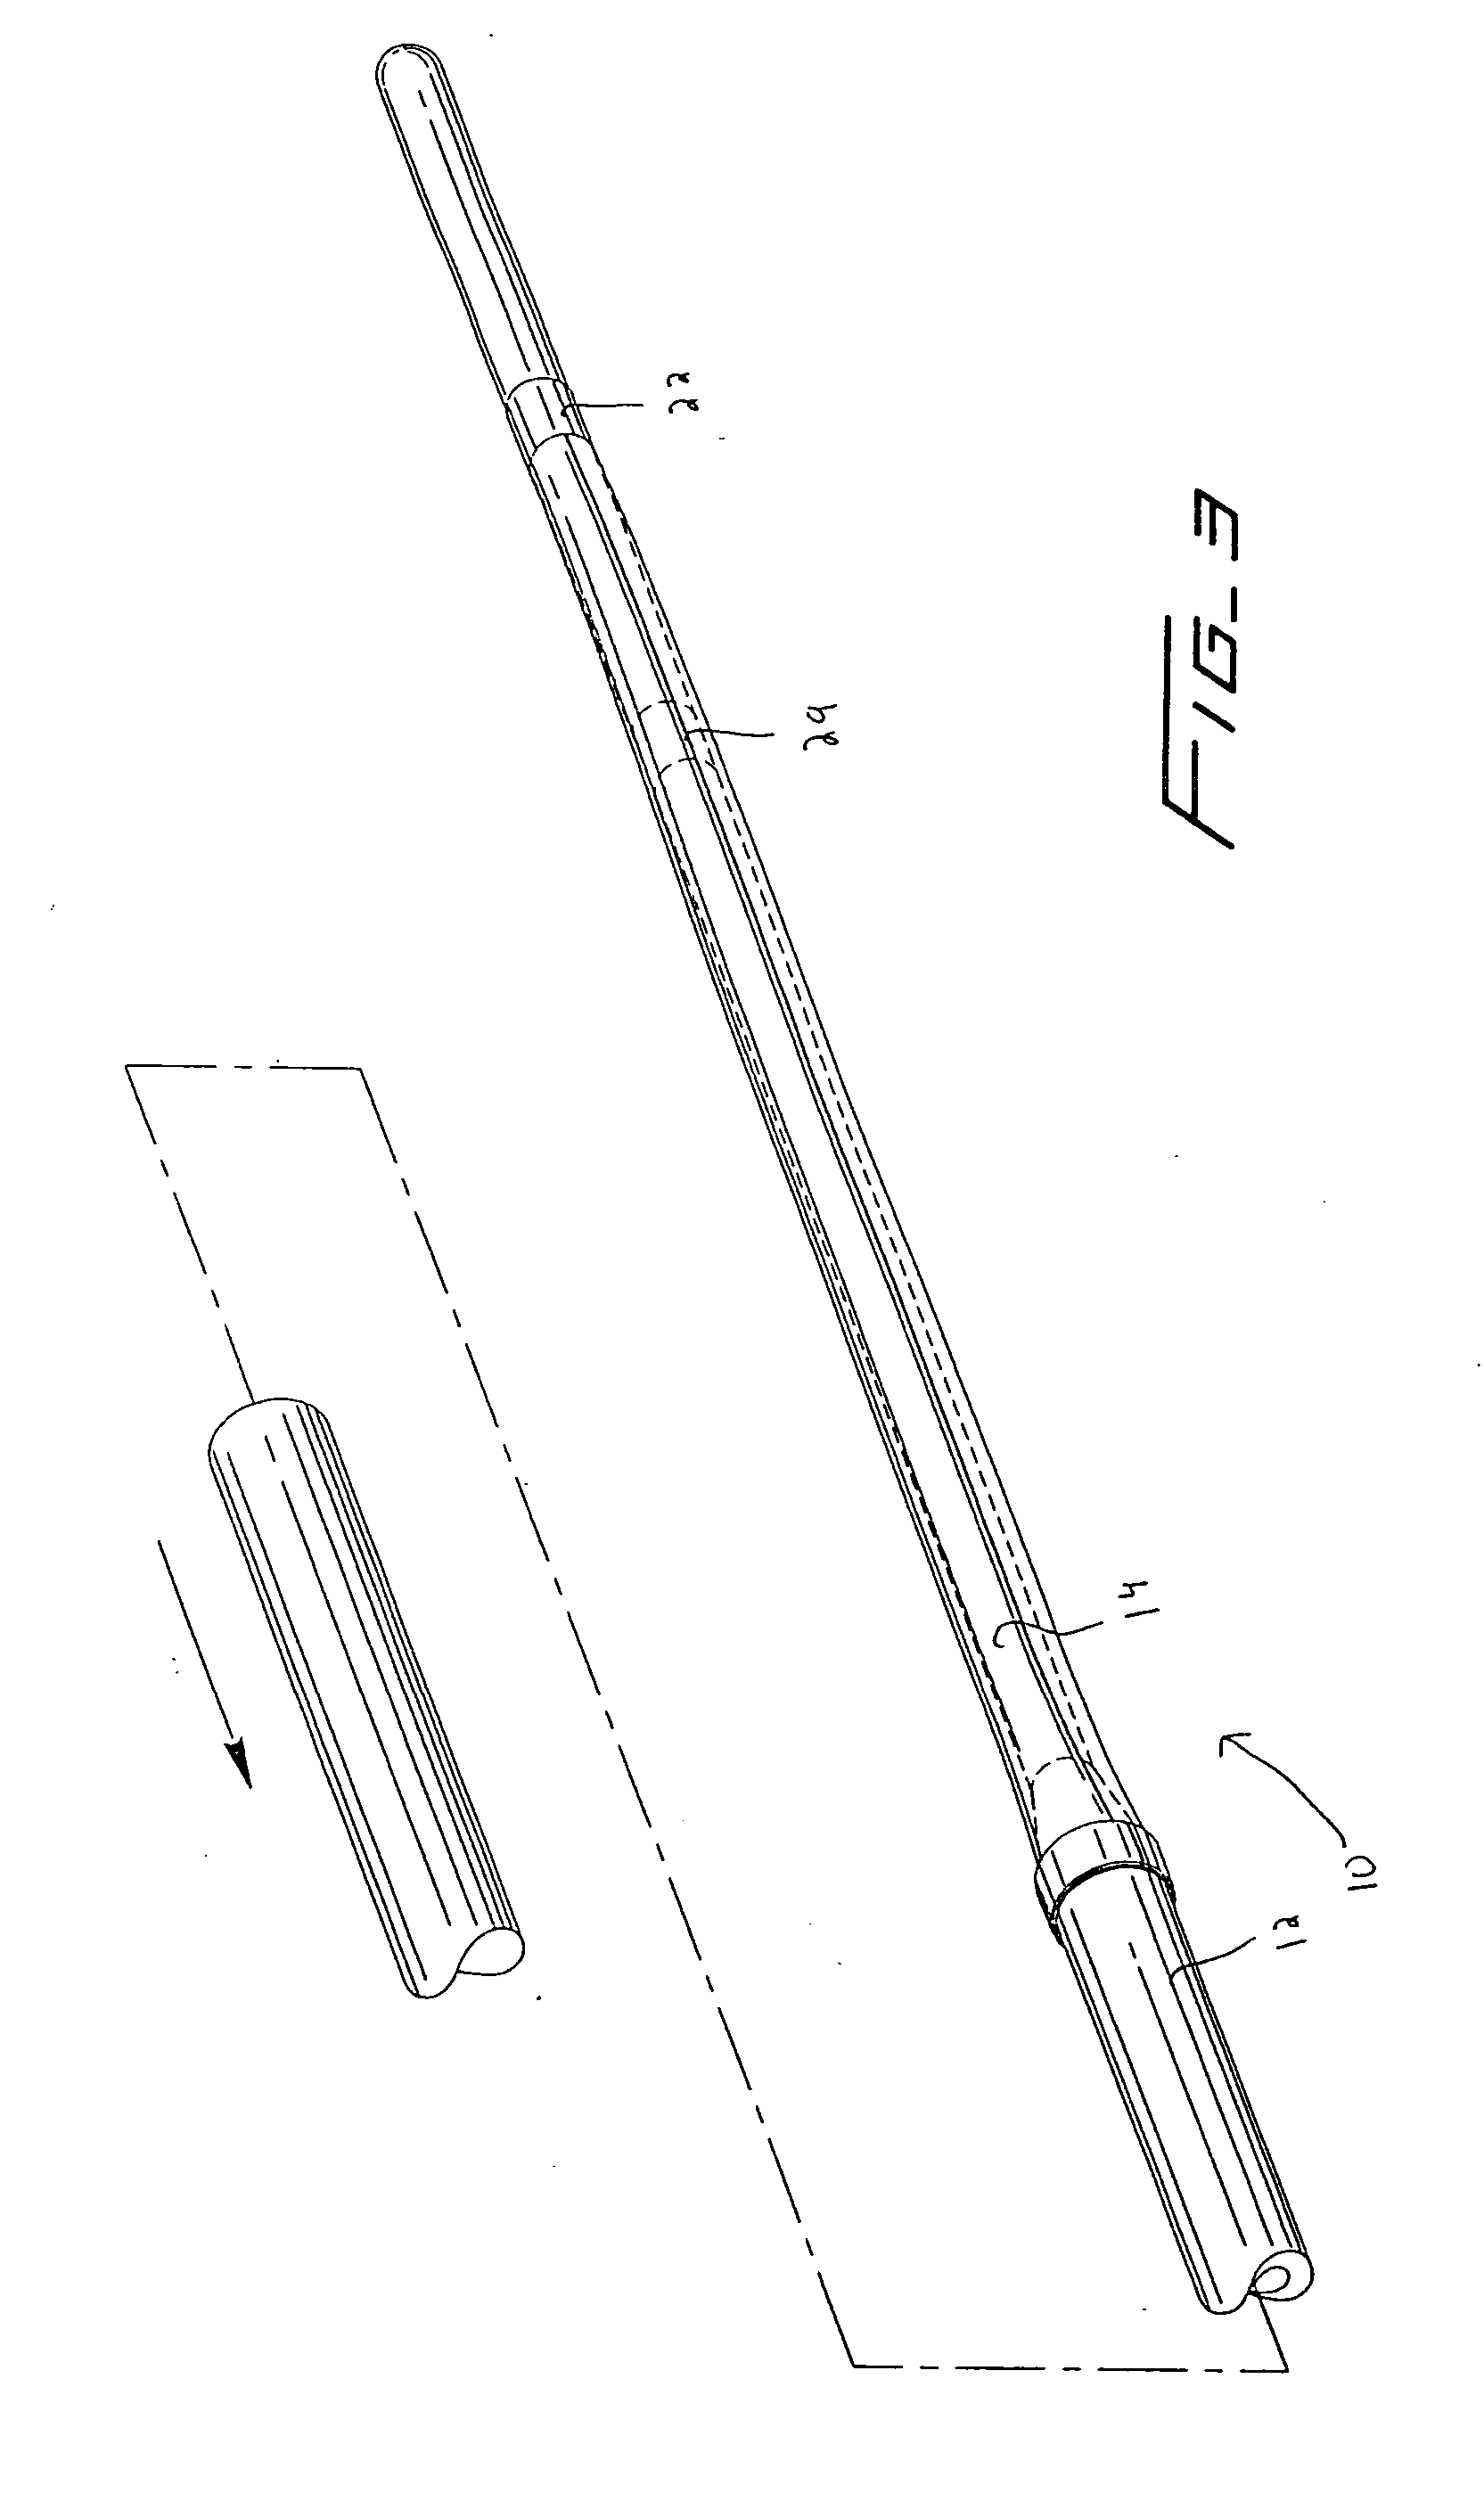 Distal protection device